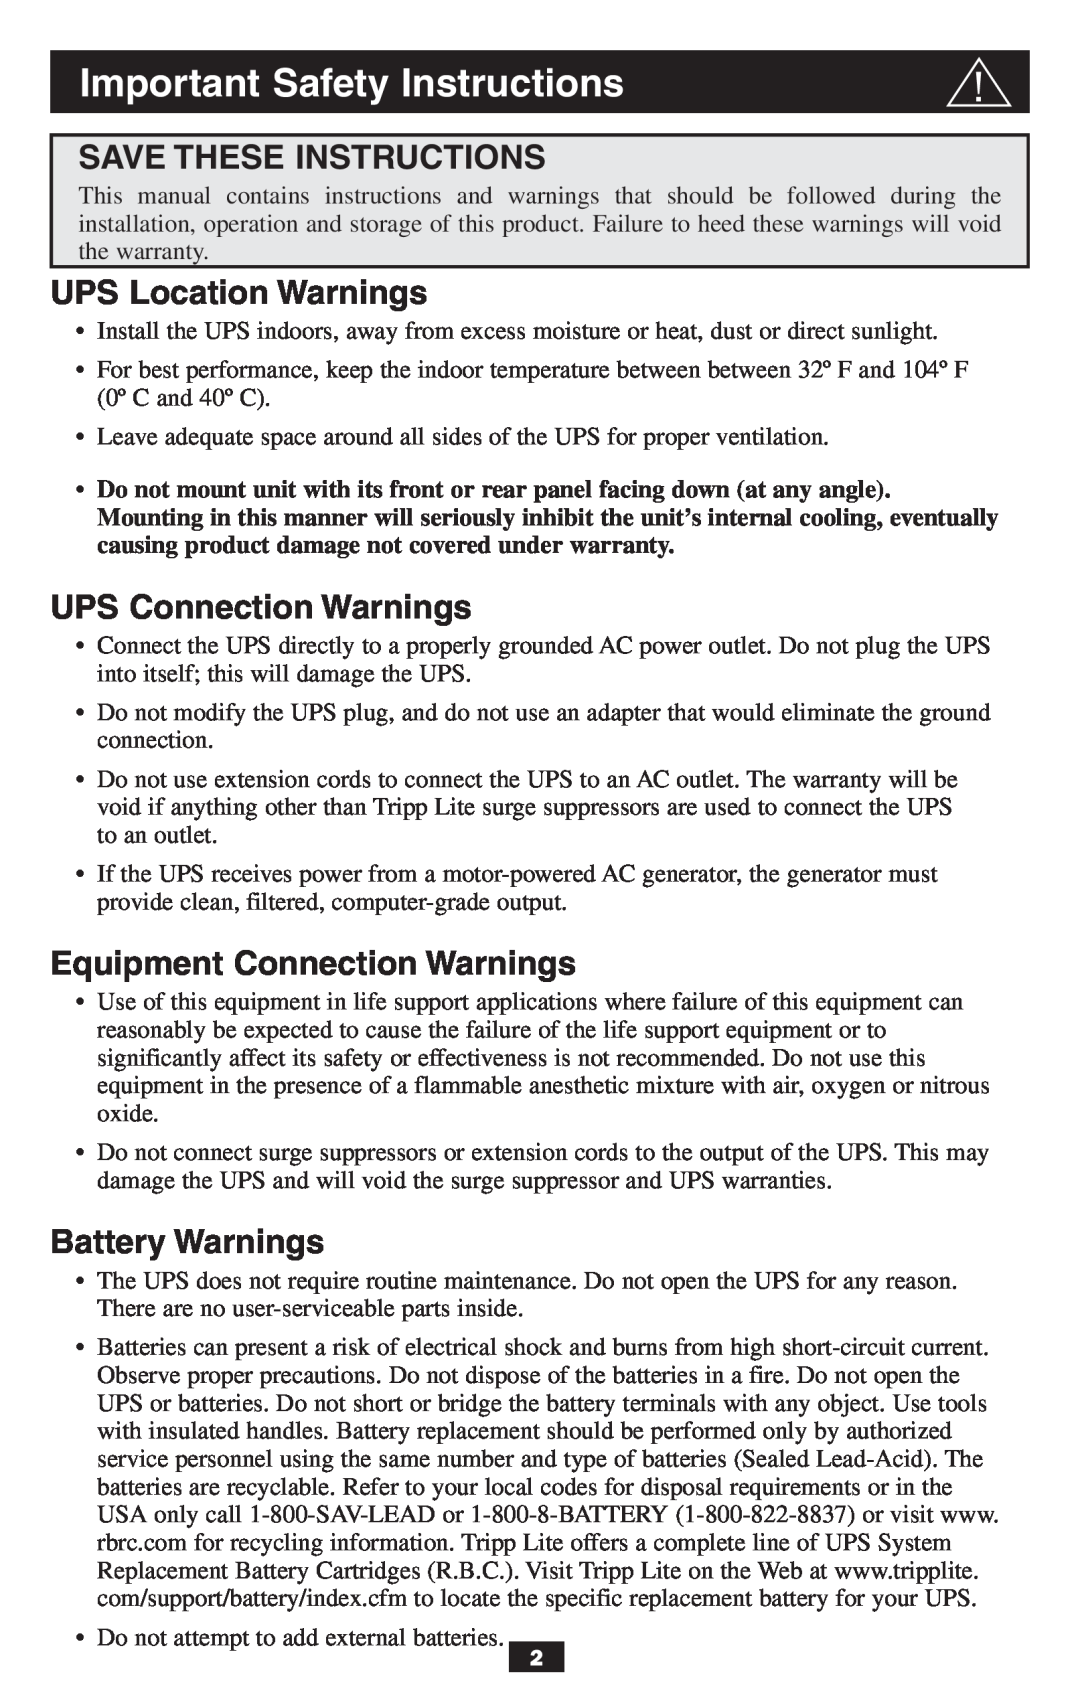 Tripp Lite BCPERS300 Important Safety Instructions, Save These Instructions, UPS Location Warnings, Battery Warnings 